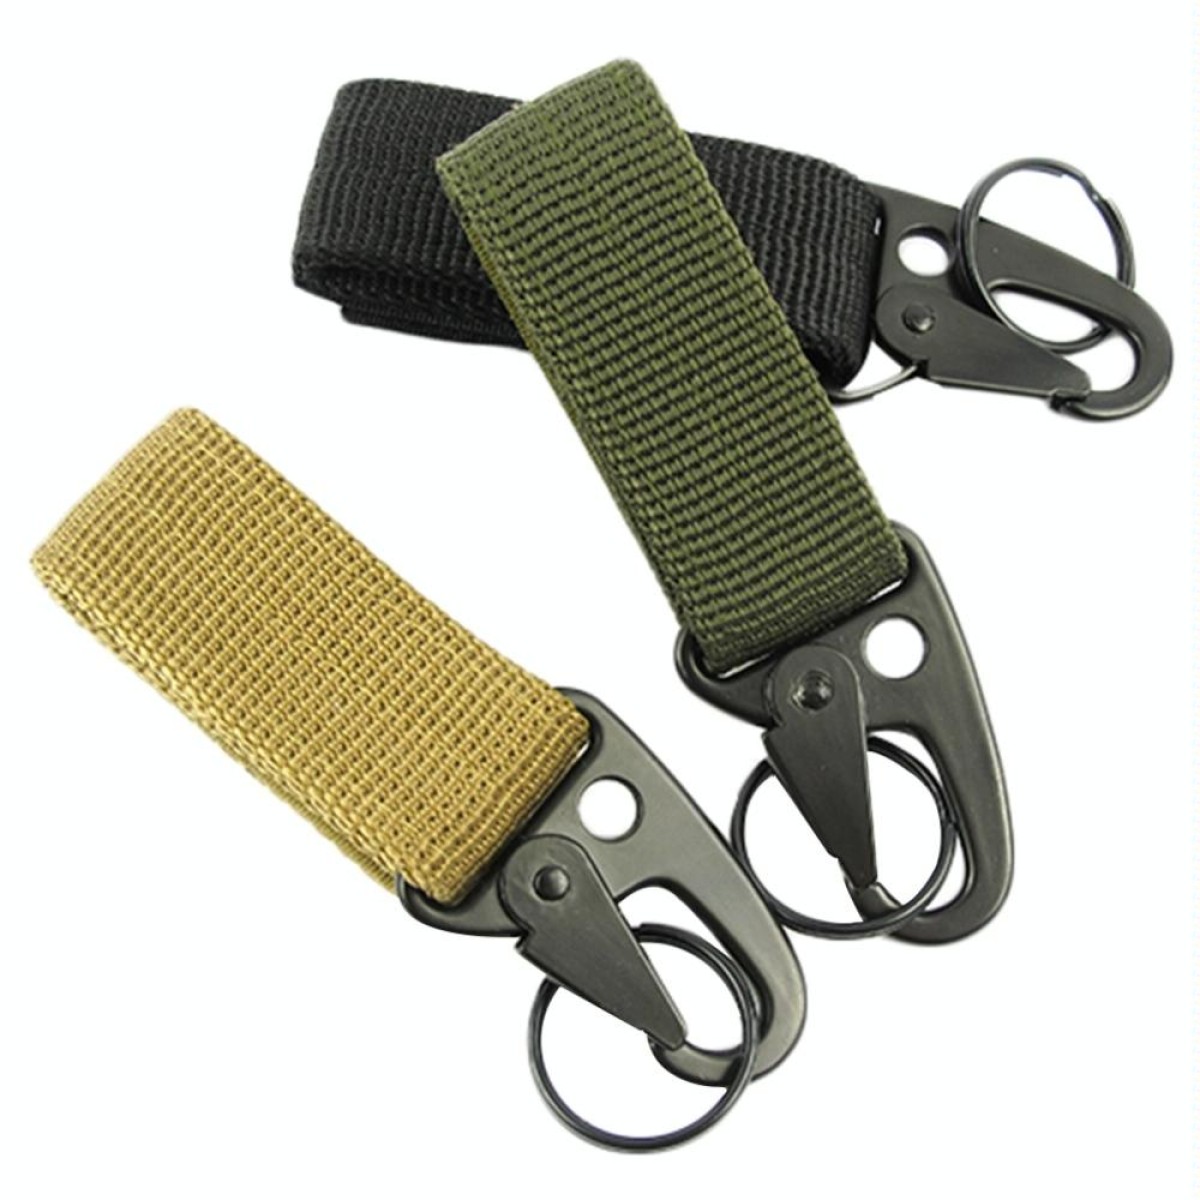 2PCS Outdoor Camping  Carabiner Backpack Hooks Olecranon Molle Hook Survival Gear EDC Nylon Keychain Clasp(Army Green)